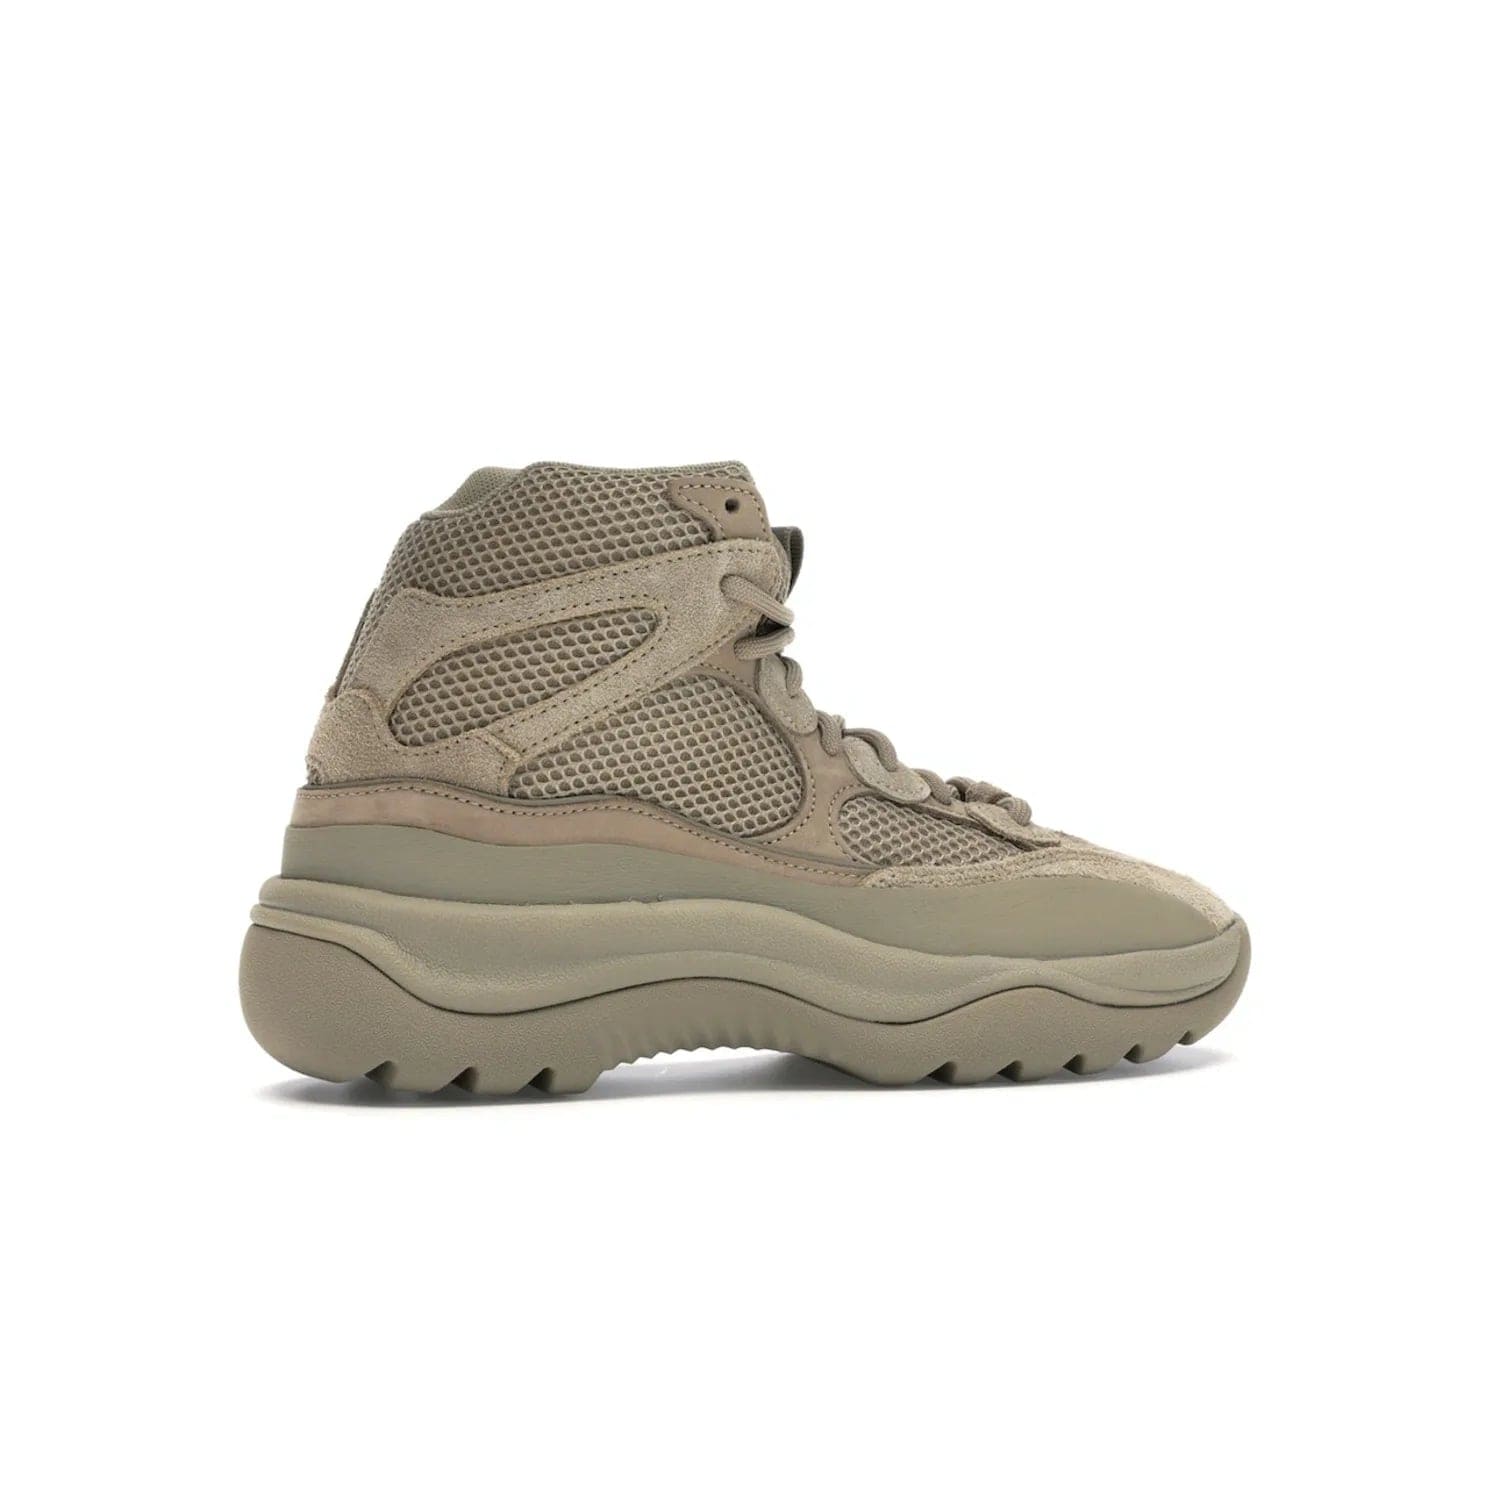 adidas Yeezy Desert Boot Rock - Image 35 - Only at www.BallersClubKickz.com - #
This season, make a fashion statement with the adidas Yeezy Desert Boot Rock. Nubuck and suede upper offers tonal style while the grooved sole provides traction and stability. Get yours in April 2019.